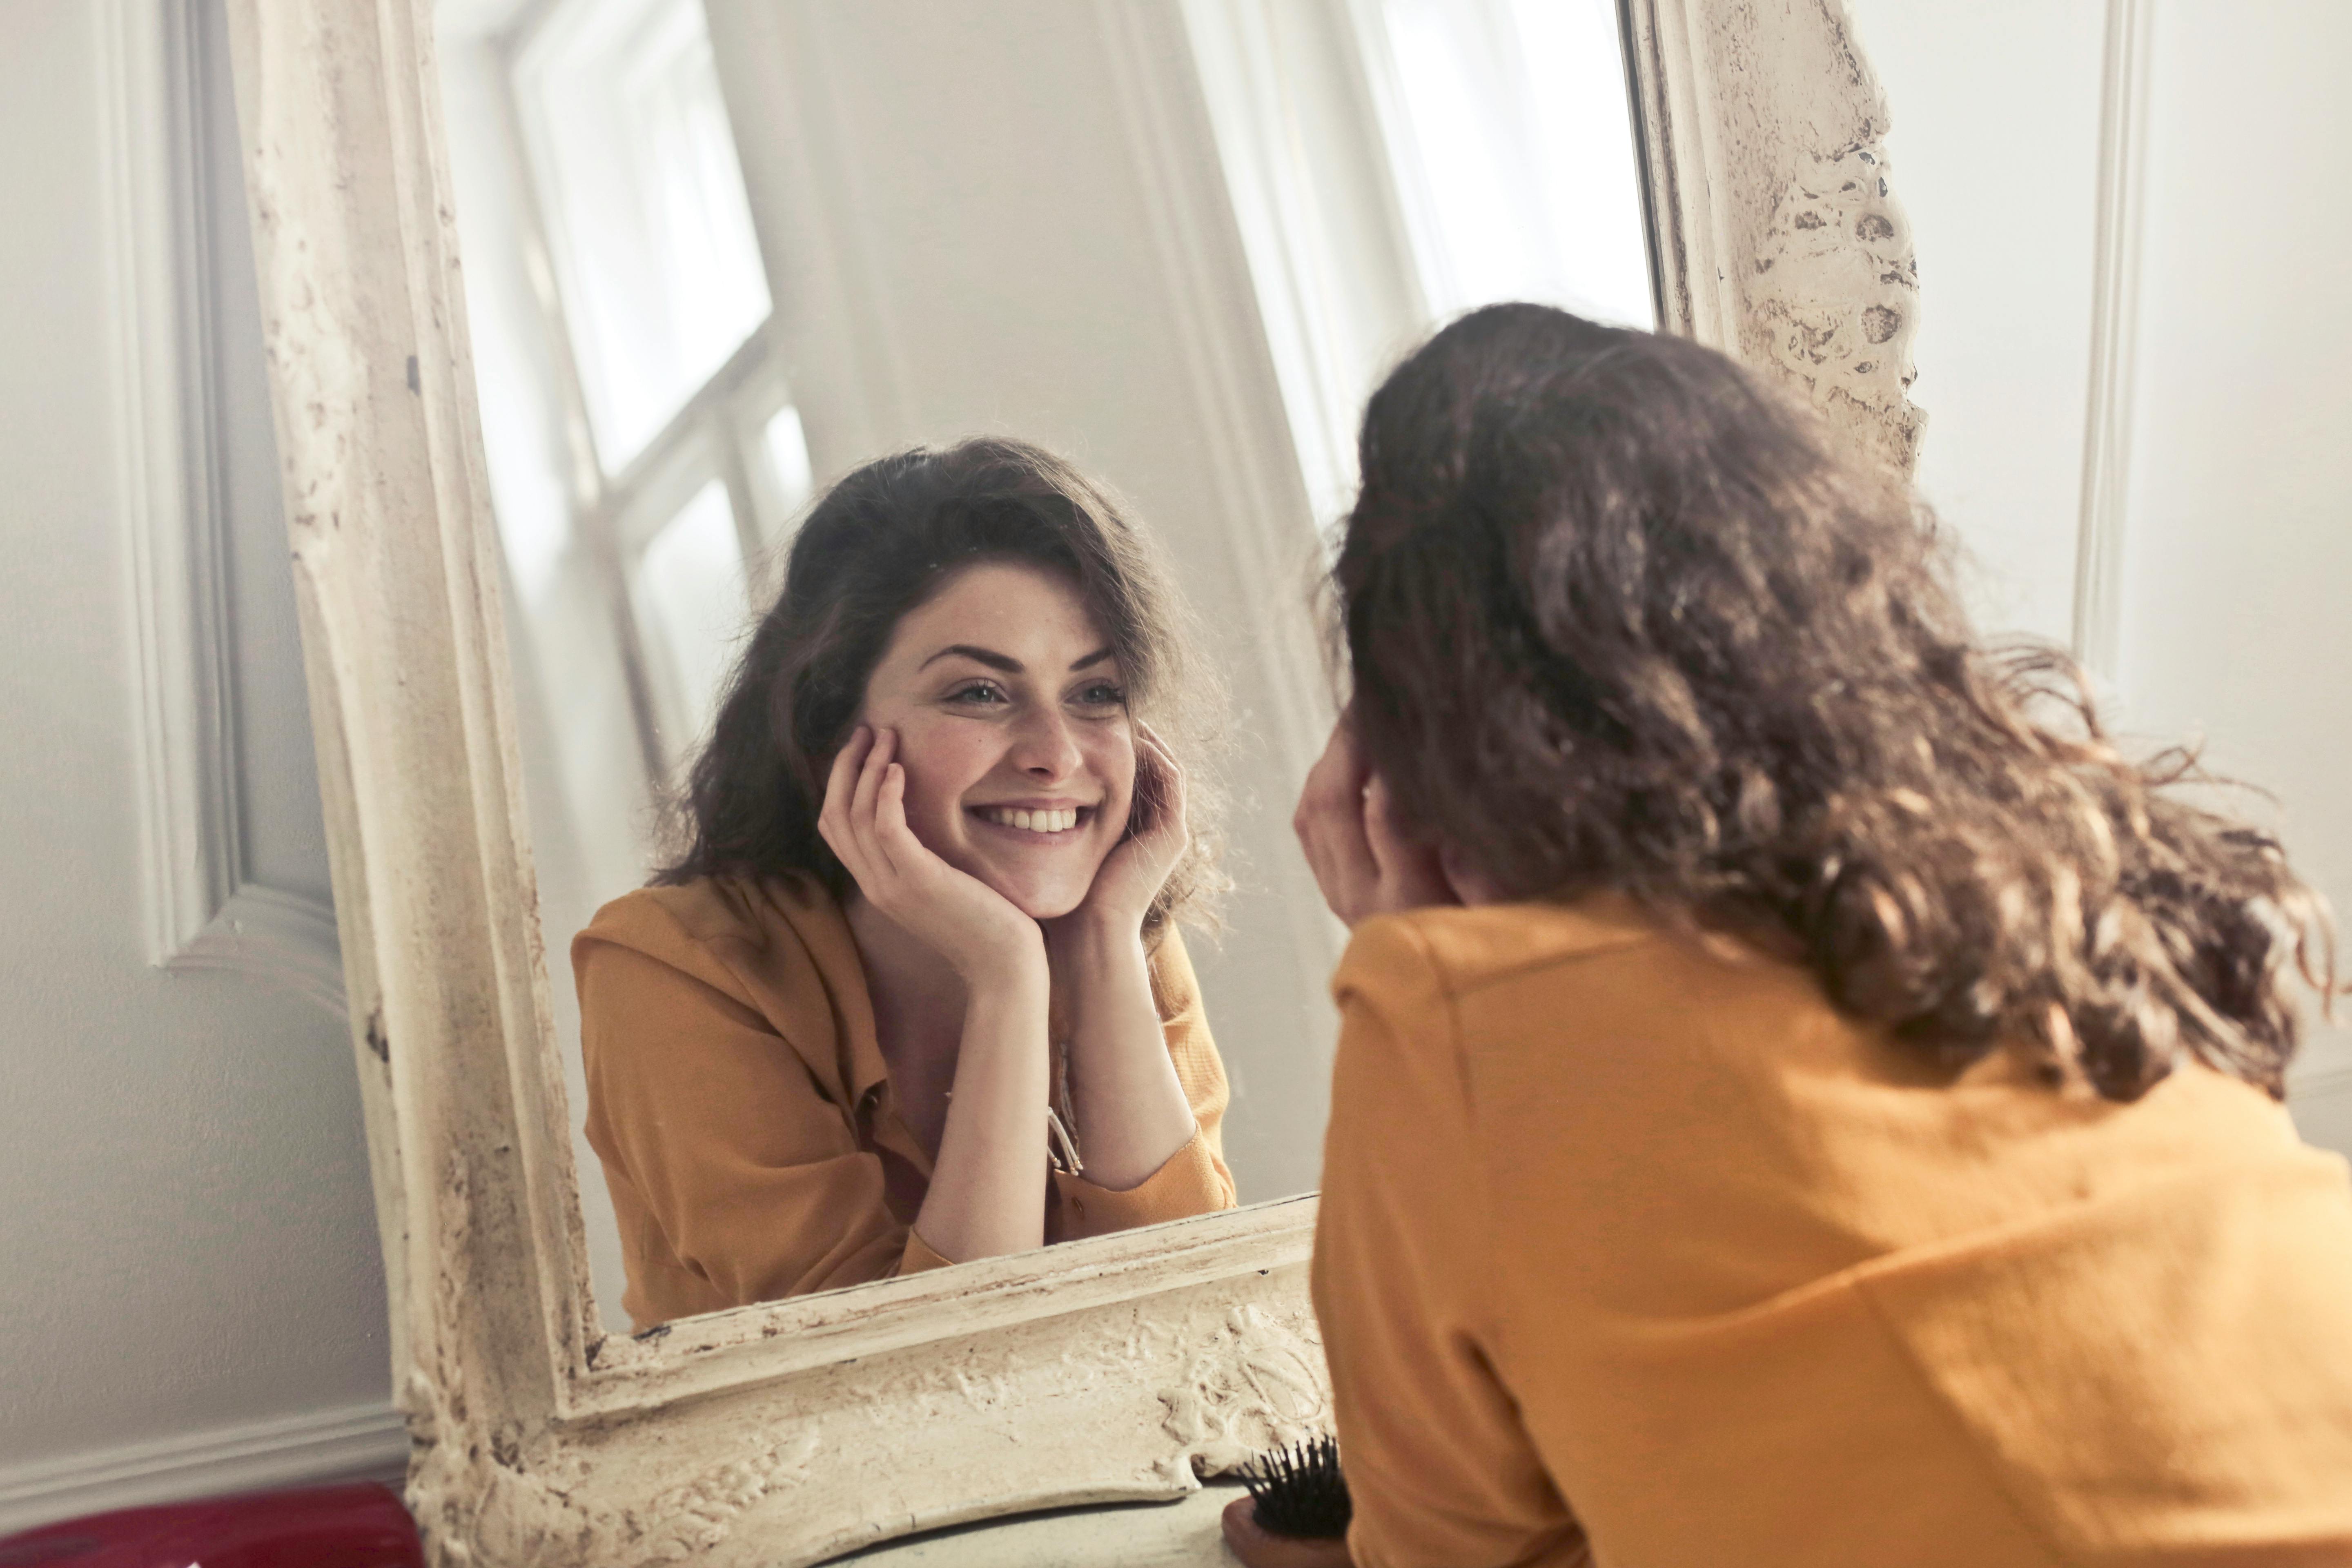 A happy woman smiling in the mirror | Source: Pexels